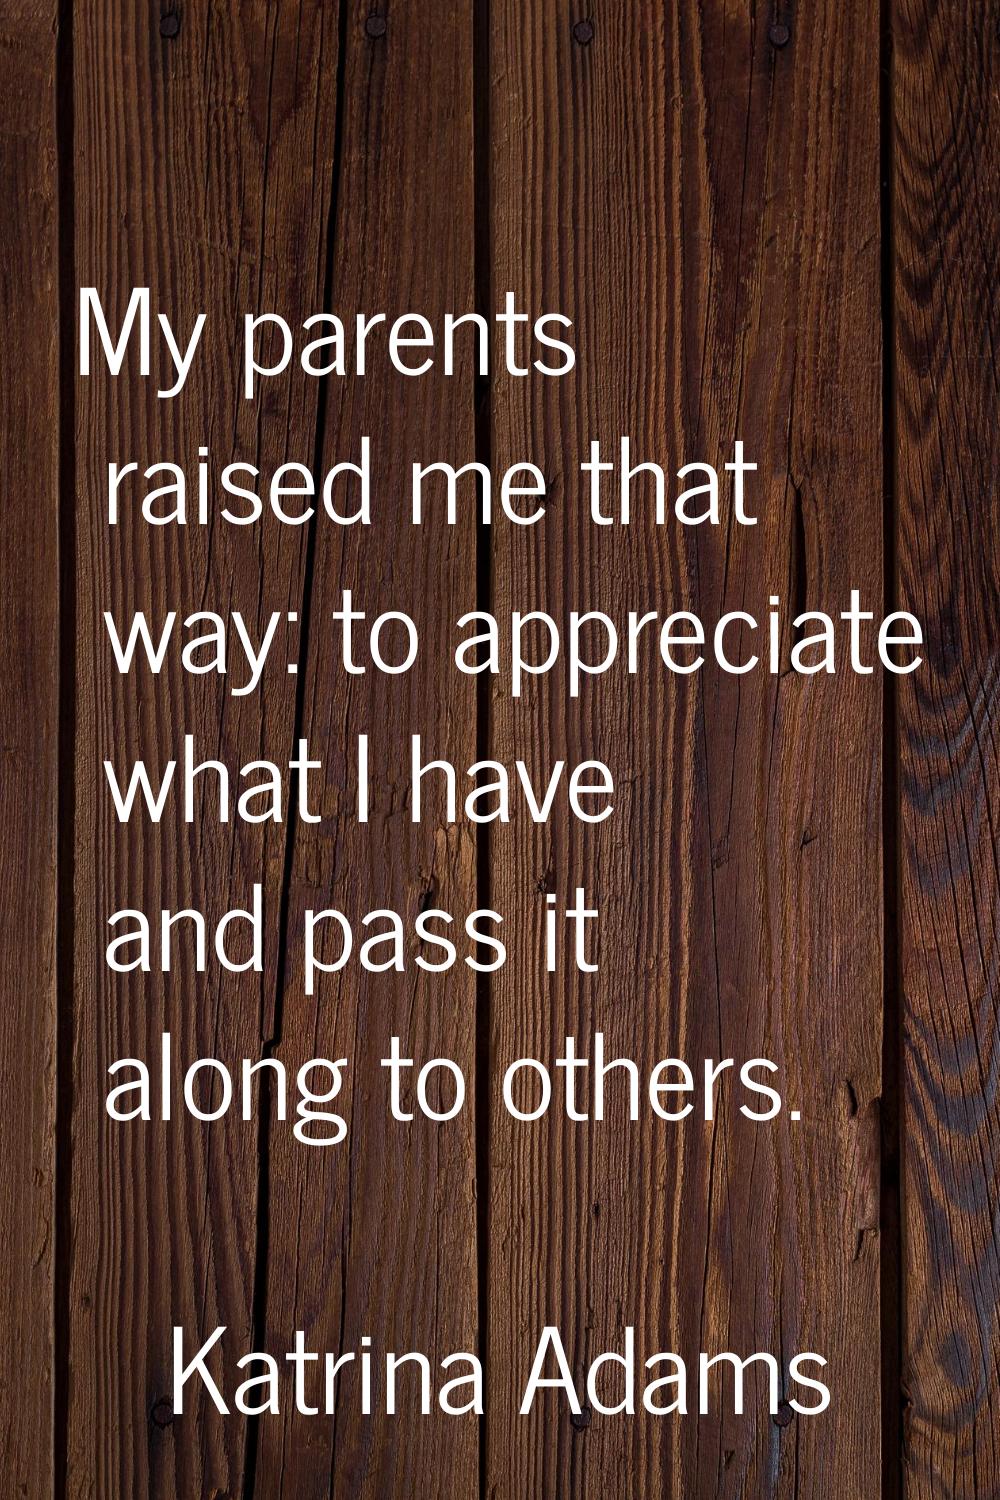 My parents raised me that way: to appreciate what I have and pass it along to others.